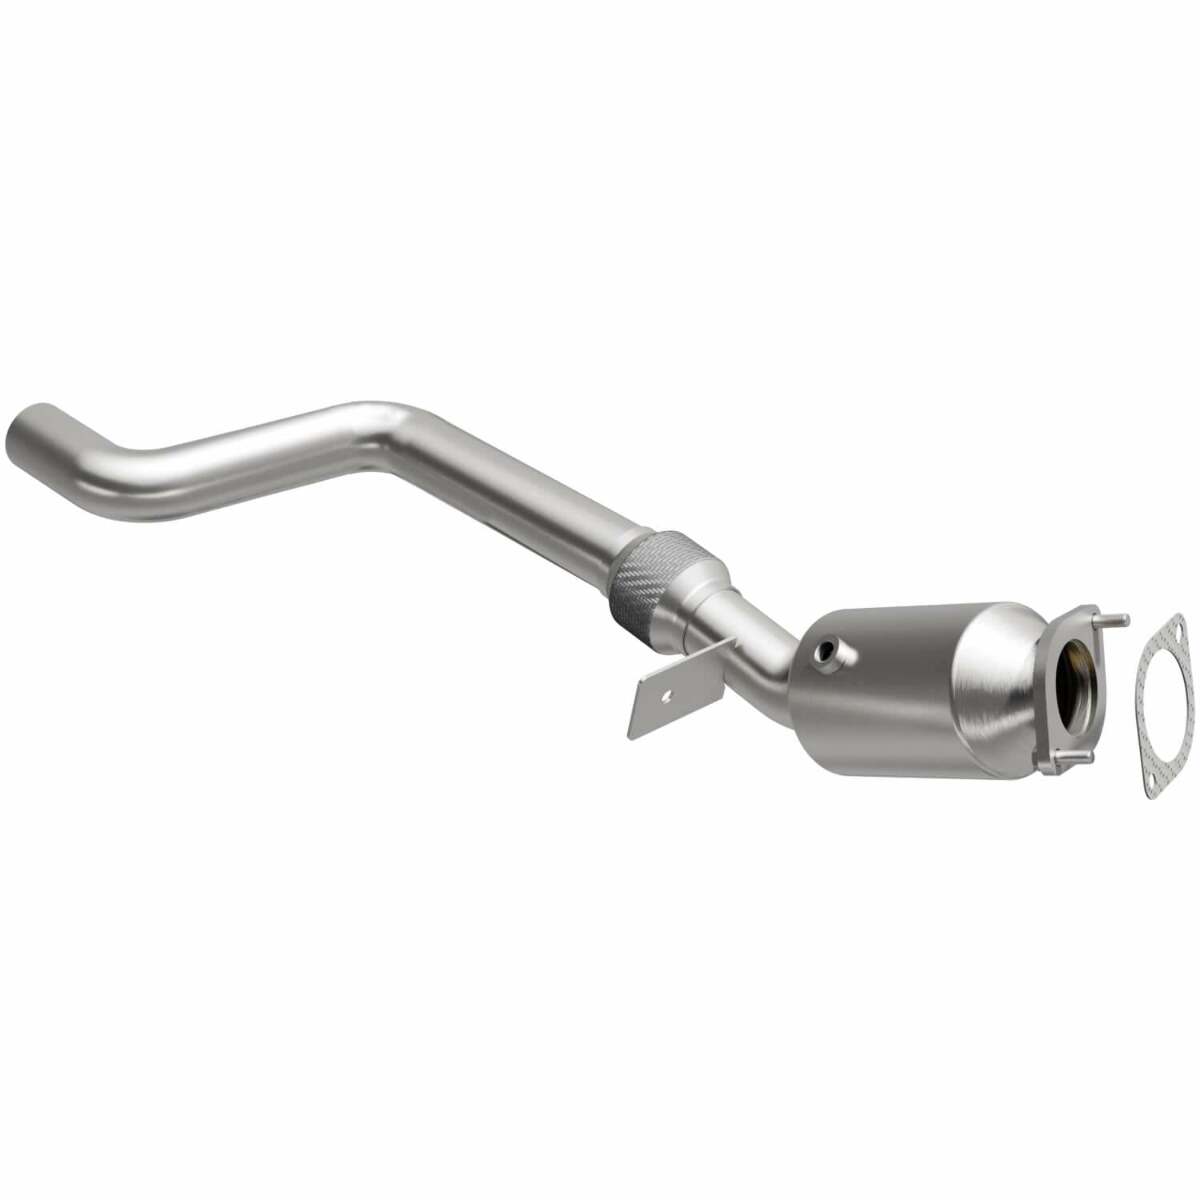 2015-2017 Ford Mustang 5.2L Direct-Fit Catalytic Converter 5561422 Magnaflow